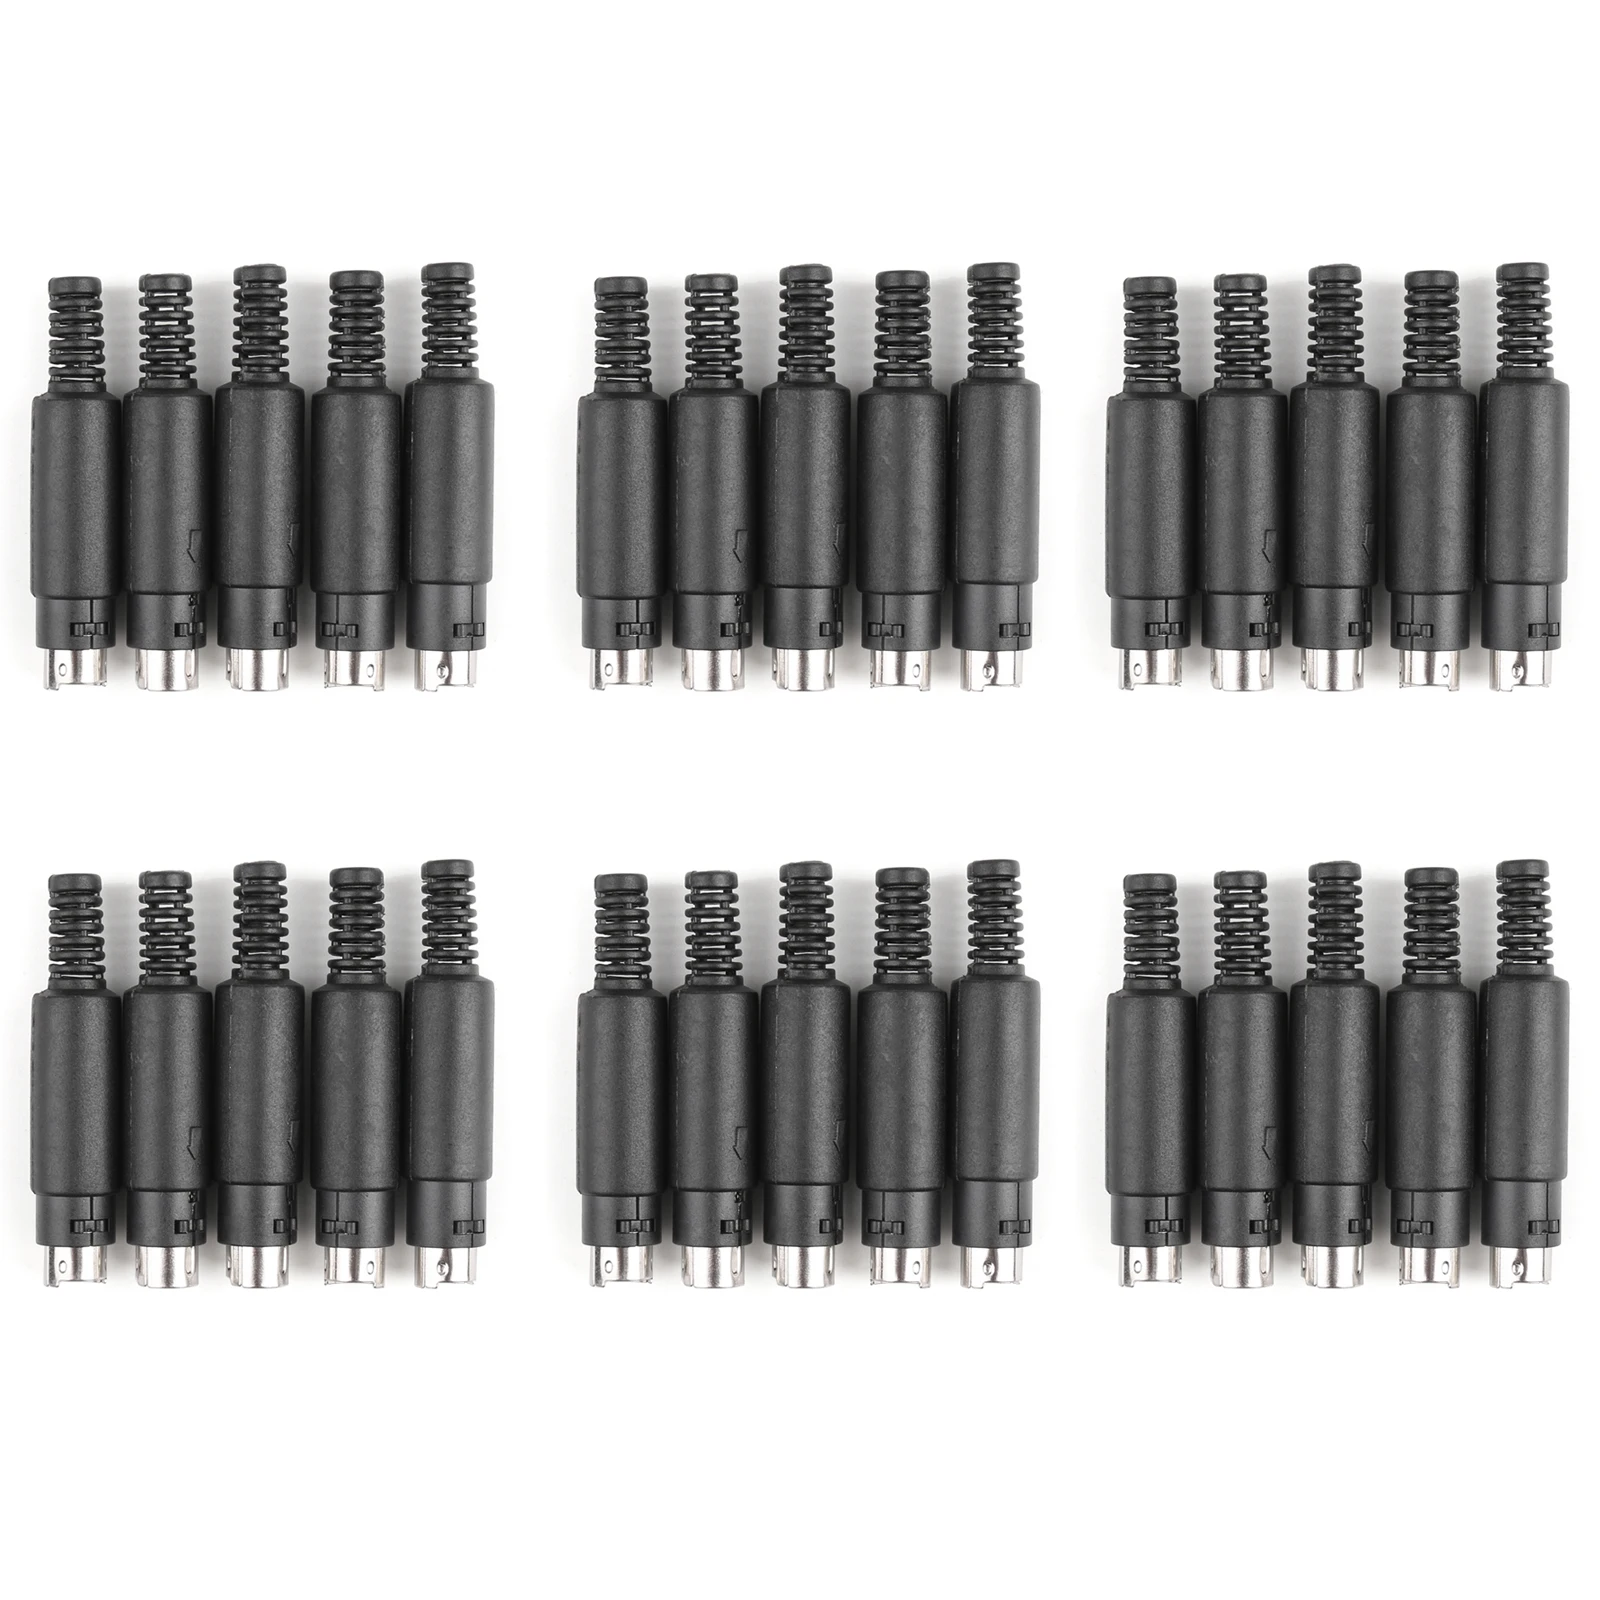 Artudatech 10 Pcs/30 Pcs DIN Male Plug Mini 8 Pin With Plastic Handle Adapter Soldering Cables Connector Accessories